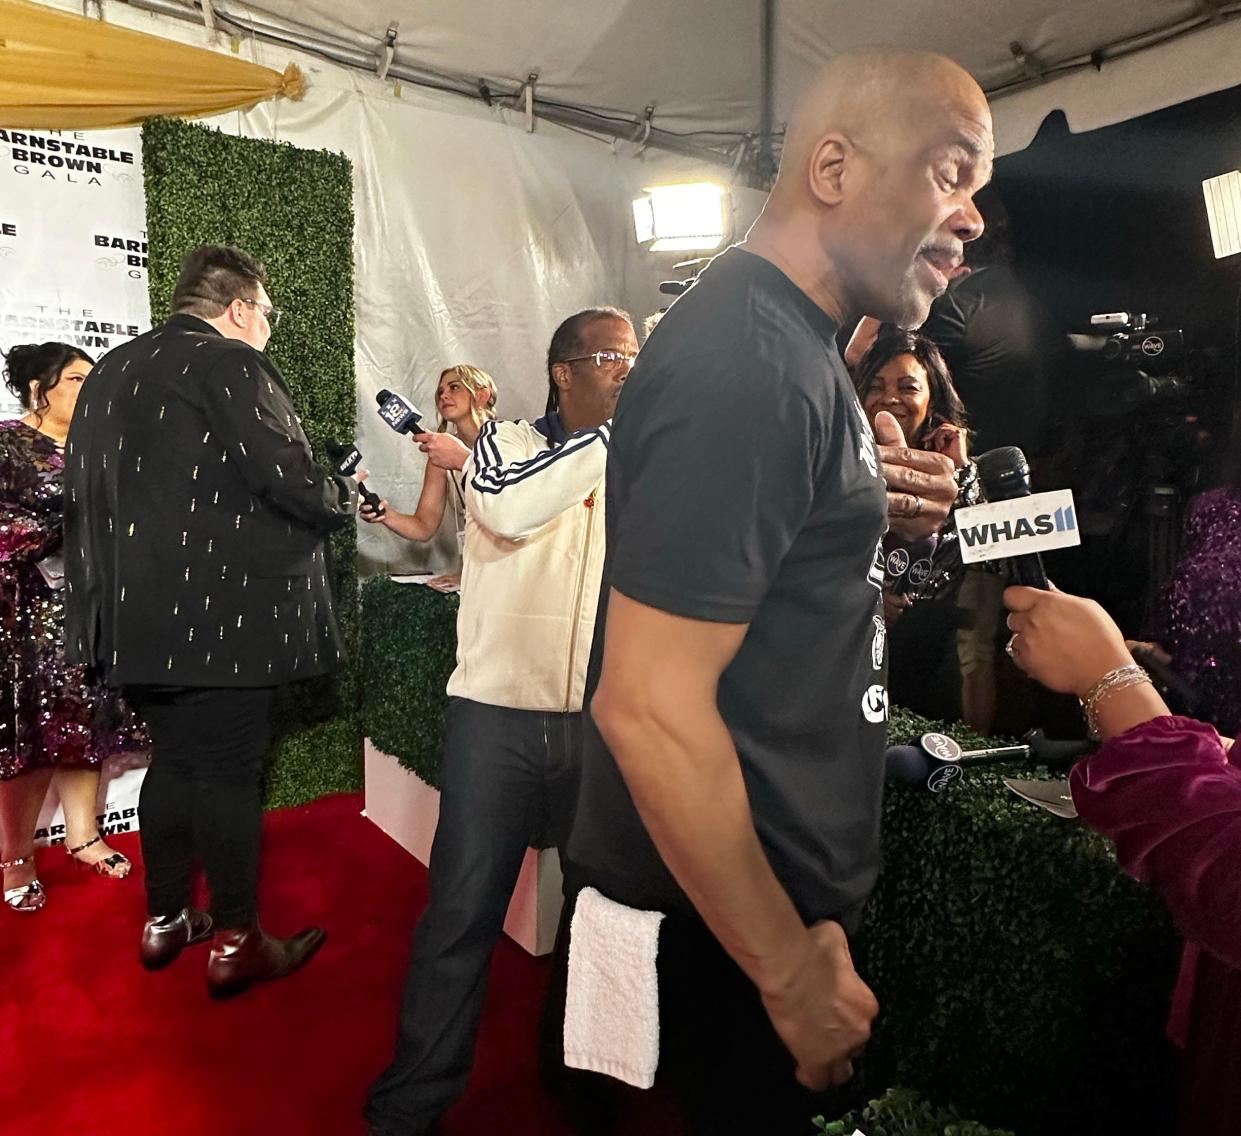 Darryl DMC McDaniels is back on the red carpet this year at the 2024 Barnstable Brown Derby Eve Gala, May 3, 2024. And he’s got a new line of cookies DMC, 'Darryl Makes Cookies.'